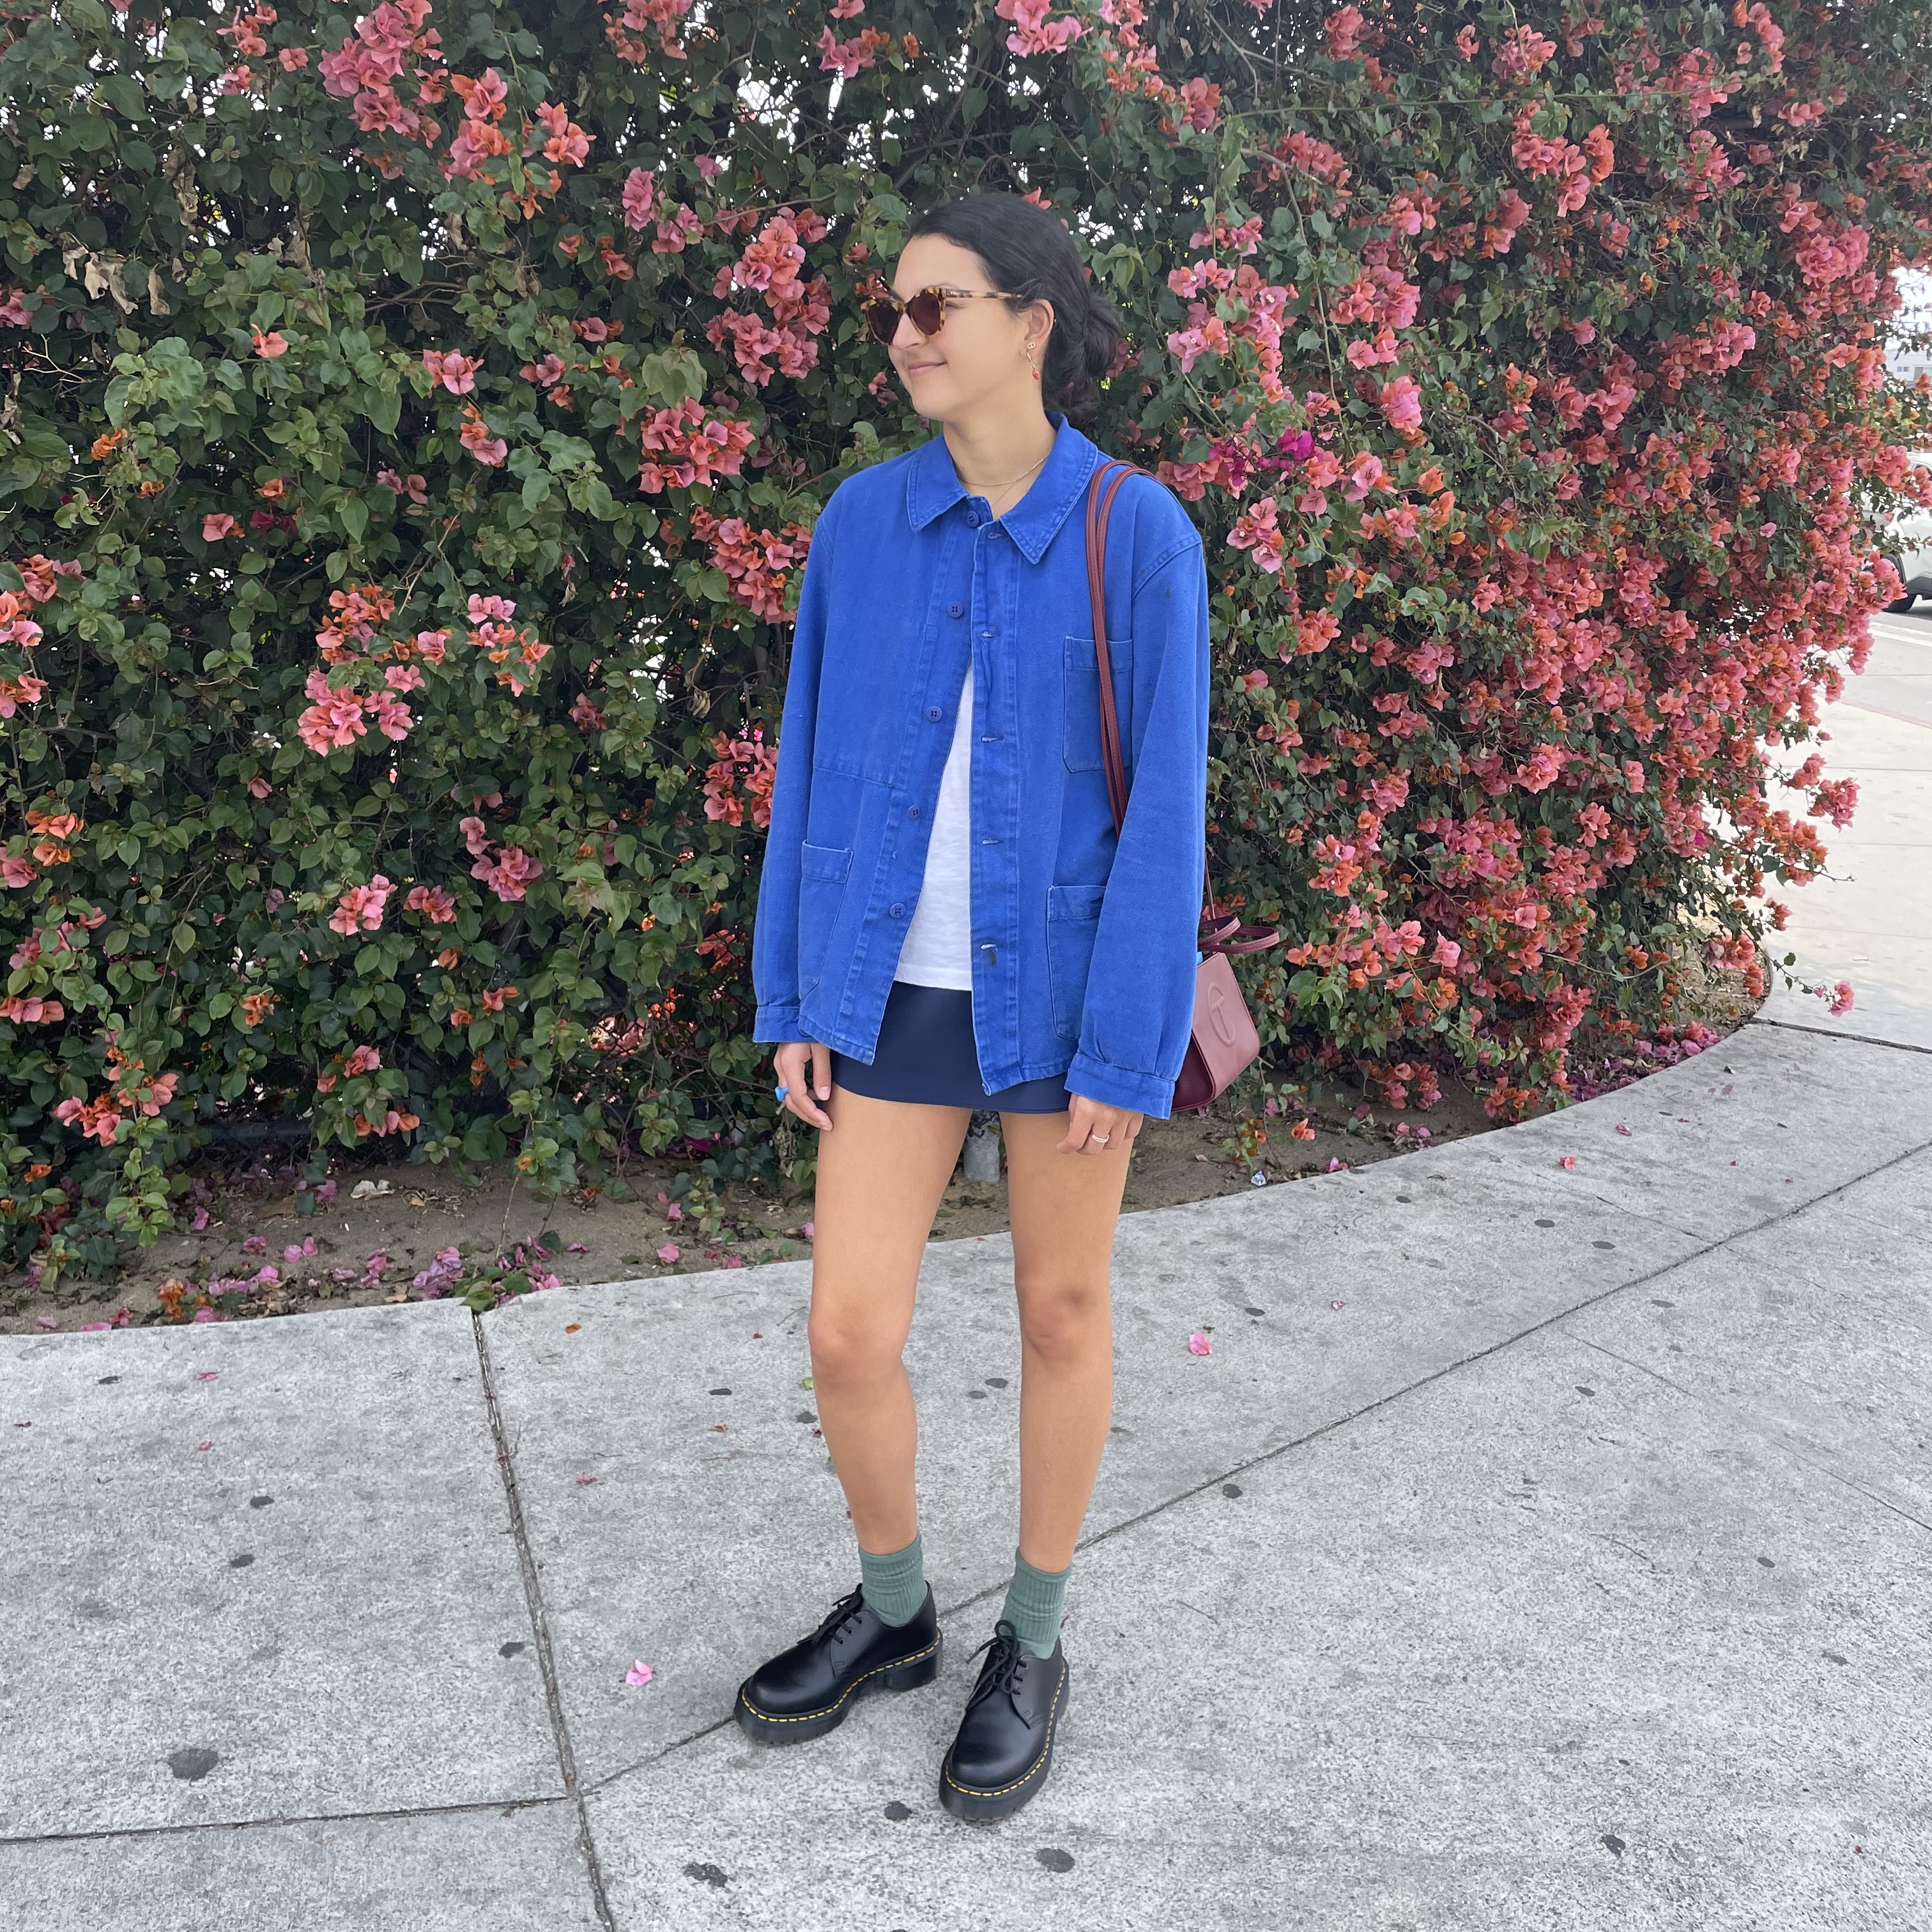 Woman in a blue chore jacket, a black skort, and Dr. Martens loafers.